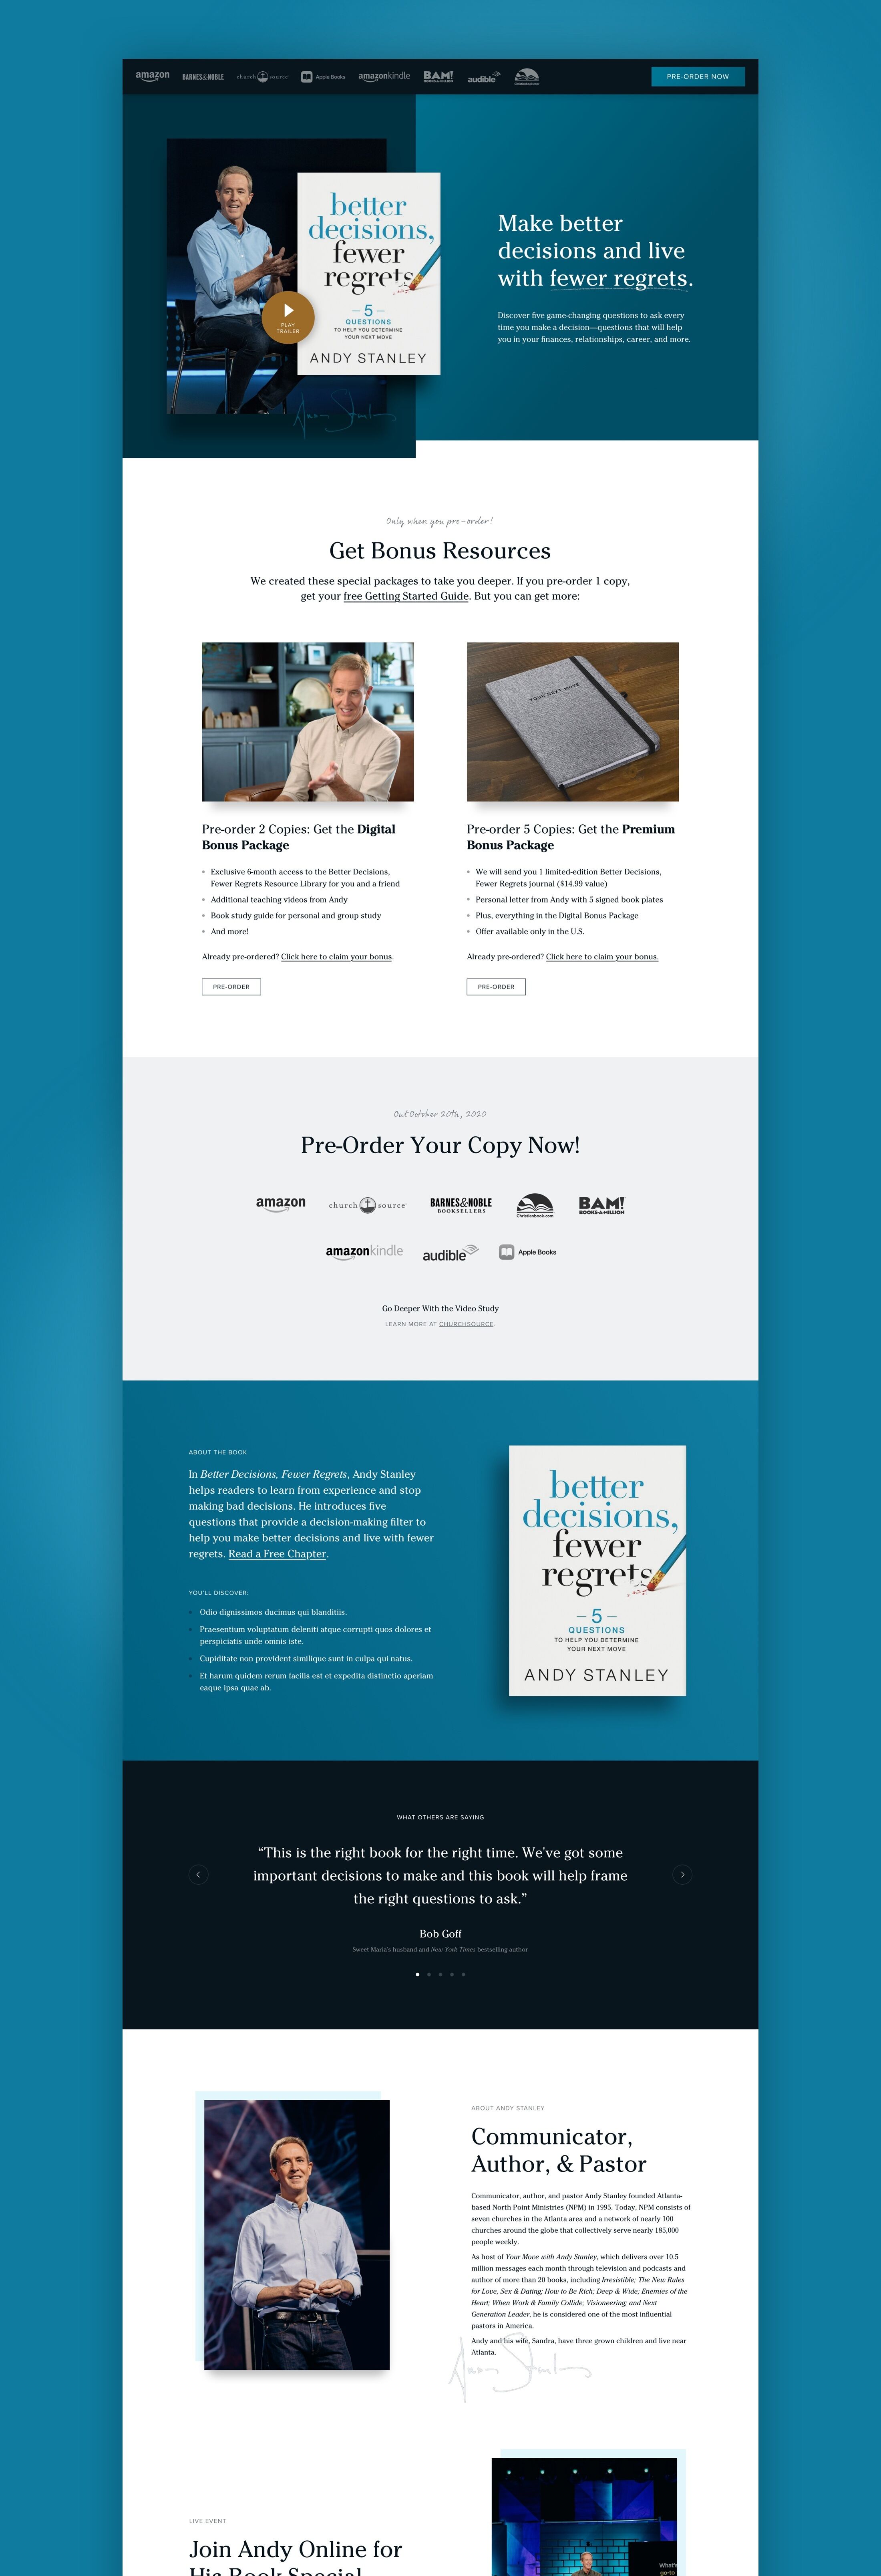 Screenshot of Andy Stanley's Better Decisions Fewer Regrets Book Landing page